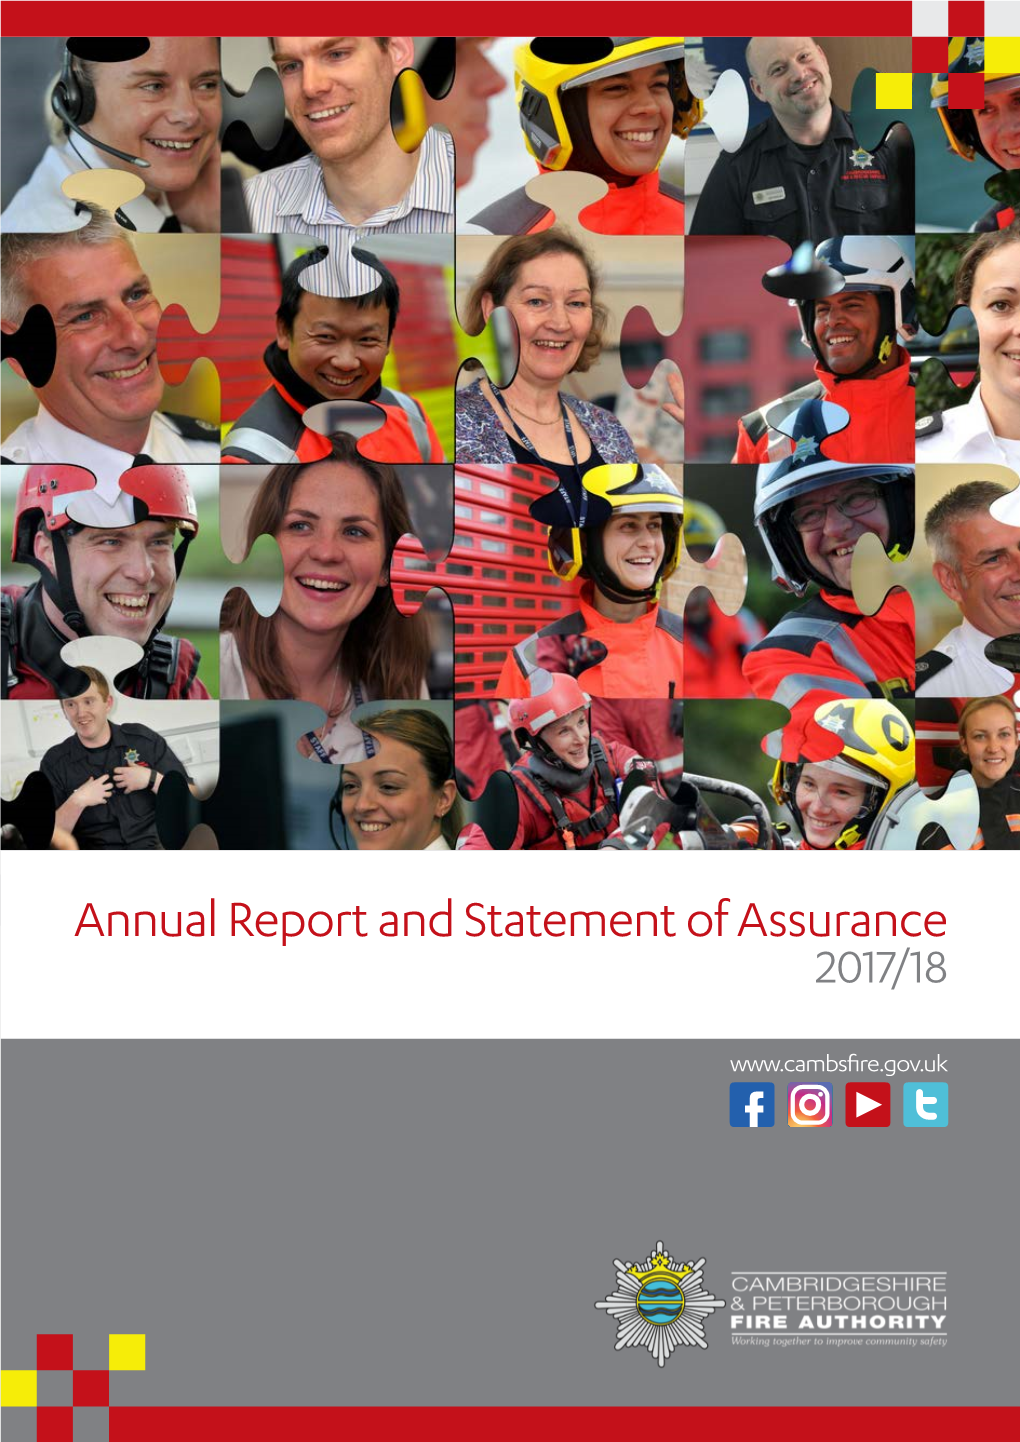 Annual Report and Statement of Assurance 2017/18